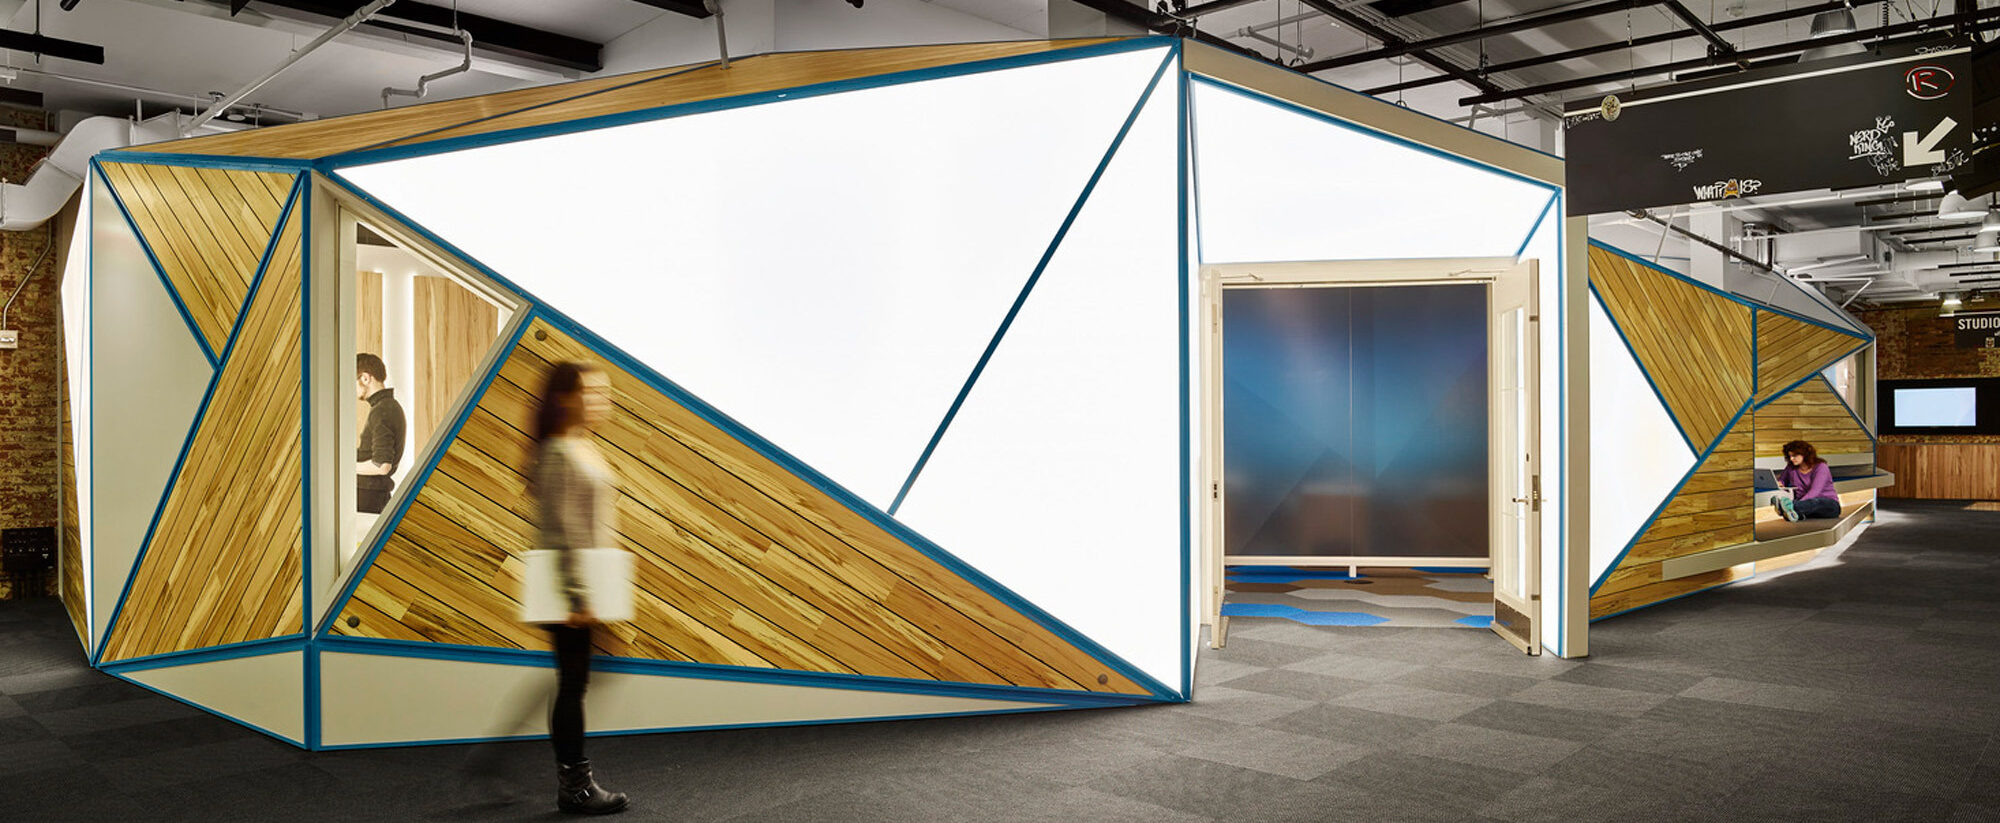 Modern office space featuring angular meeting pods with wooden slats and teal accents. Sleek, exposed ceiling fixtures add an industrial touch above the dynamic workspace layout.